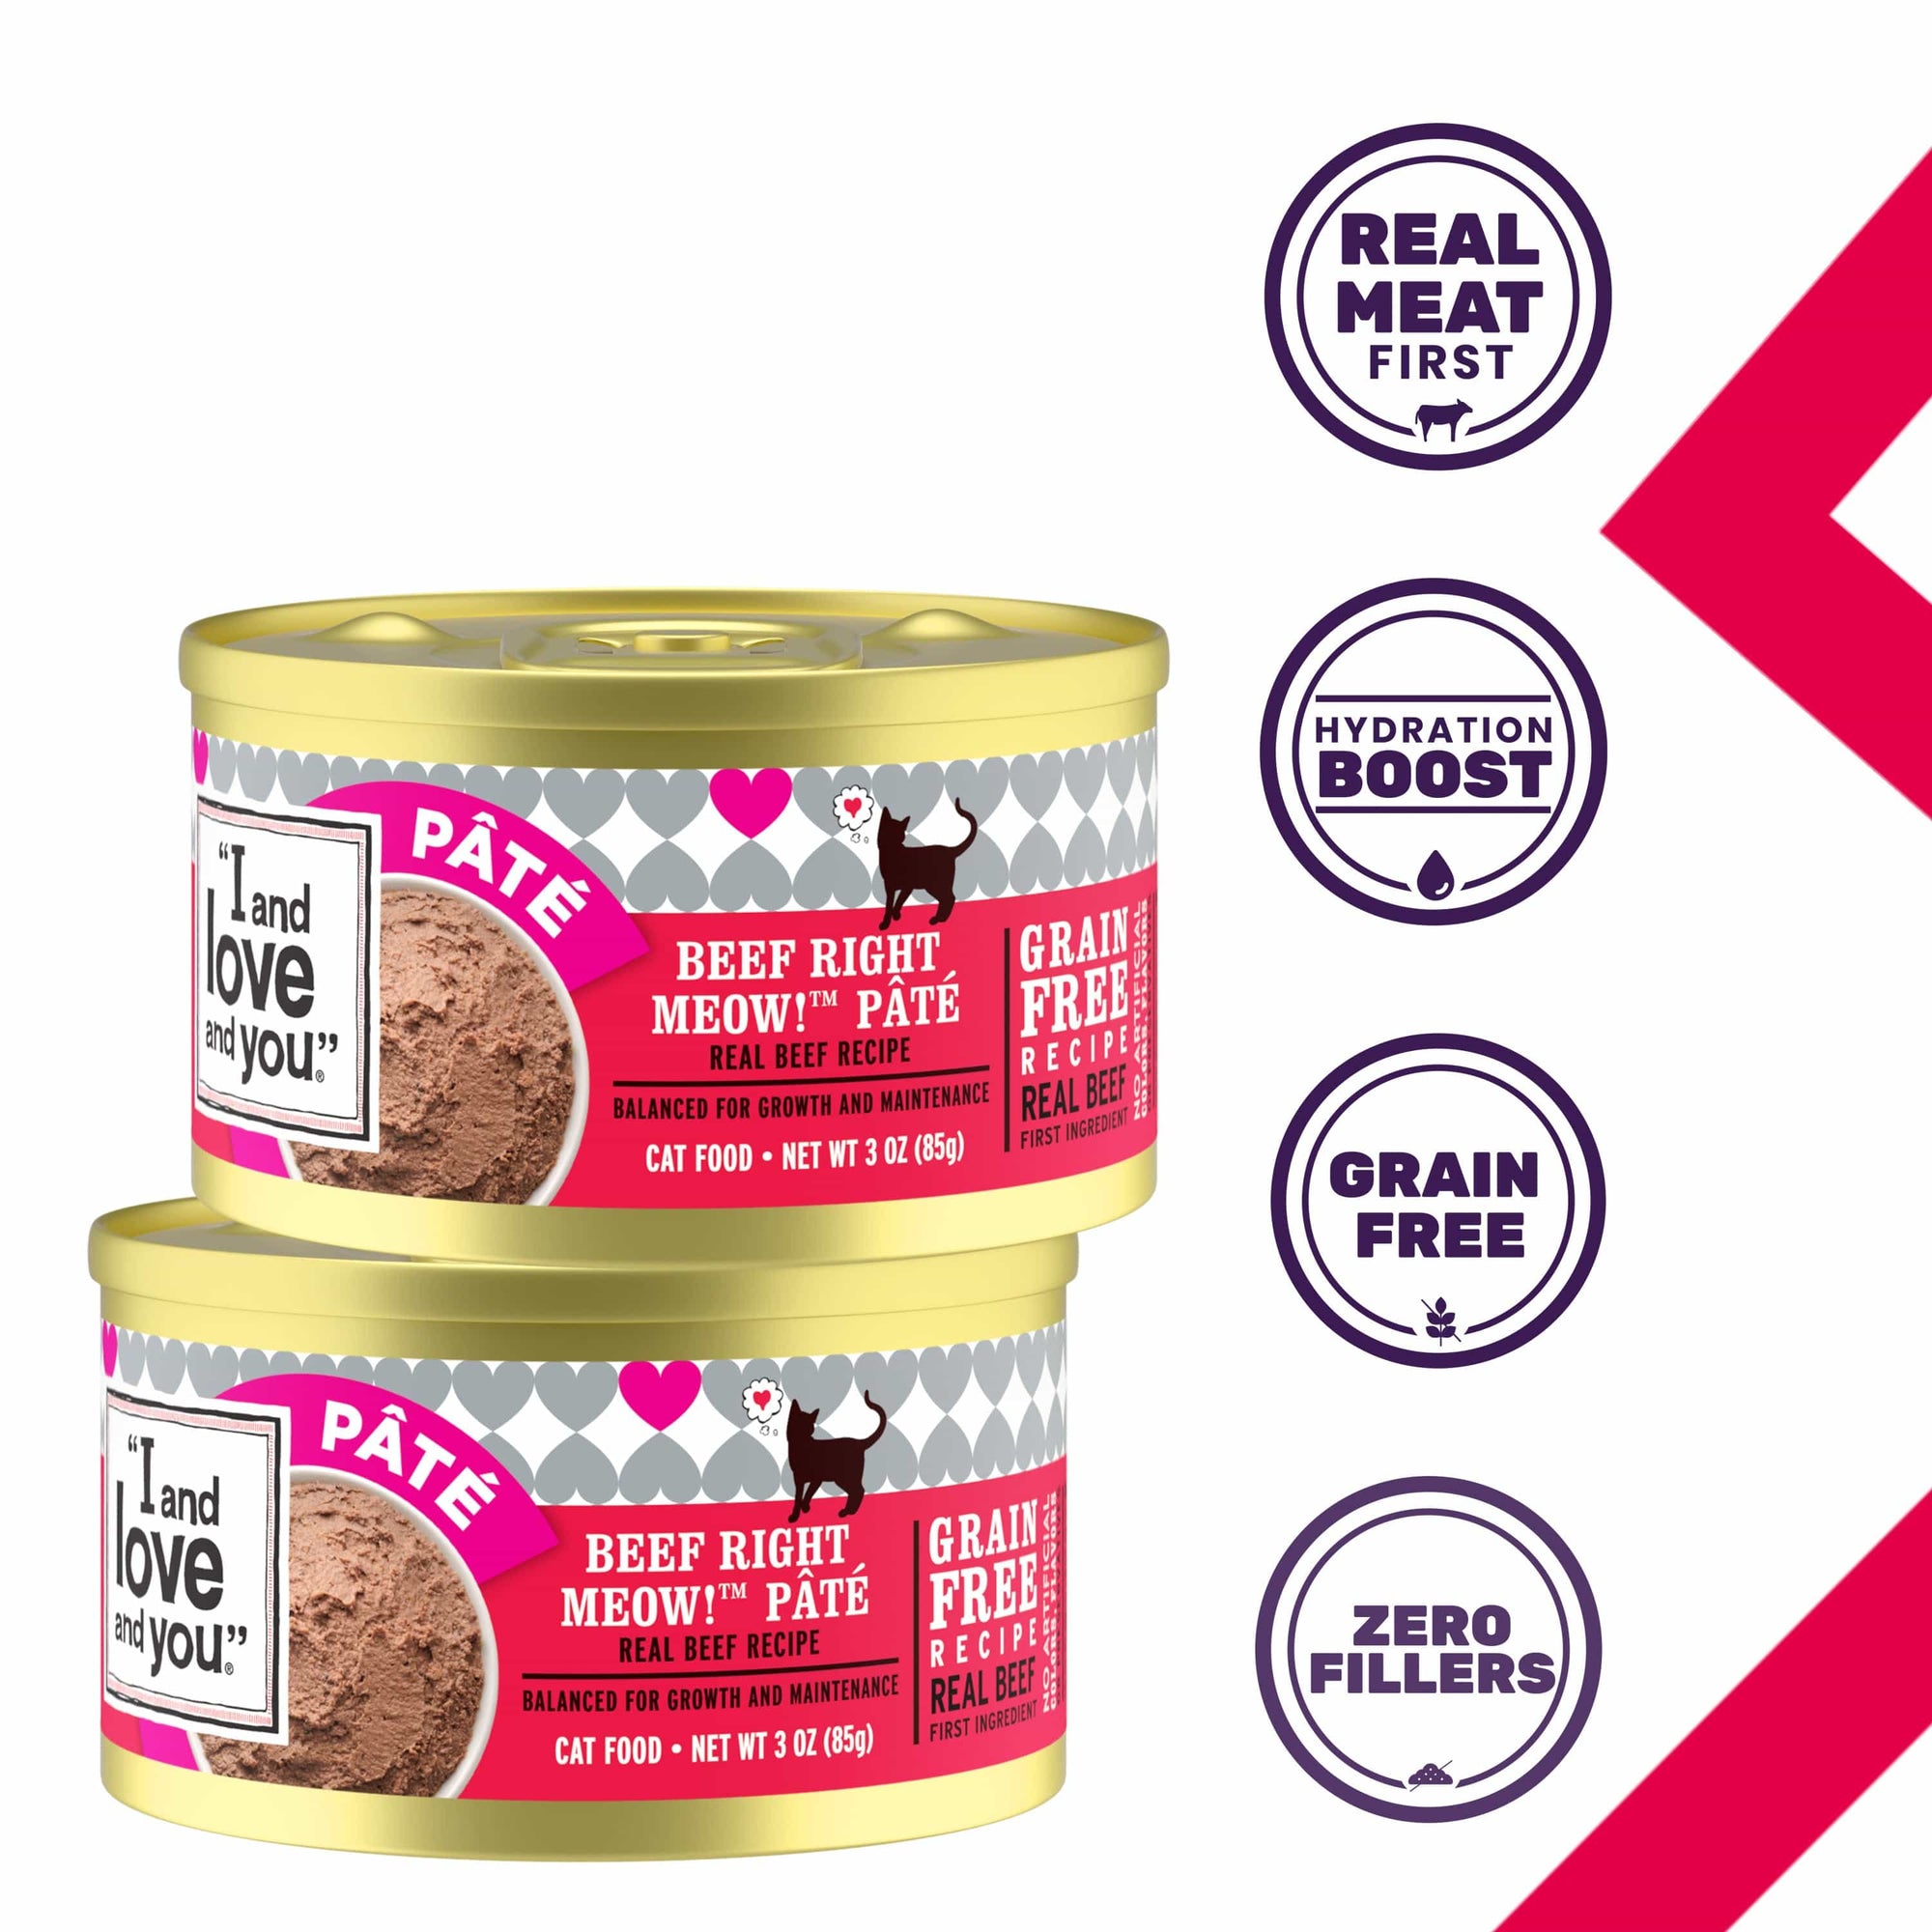 A close-up of a can of Original Recipe - Beef Right Meow! Pâté cat food, showcasing product features such as real meat first, hydration boost, grain free and zero fillers.